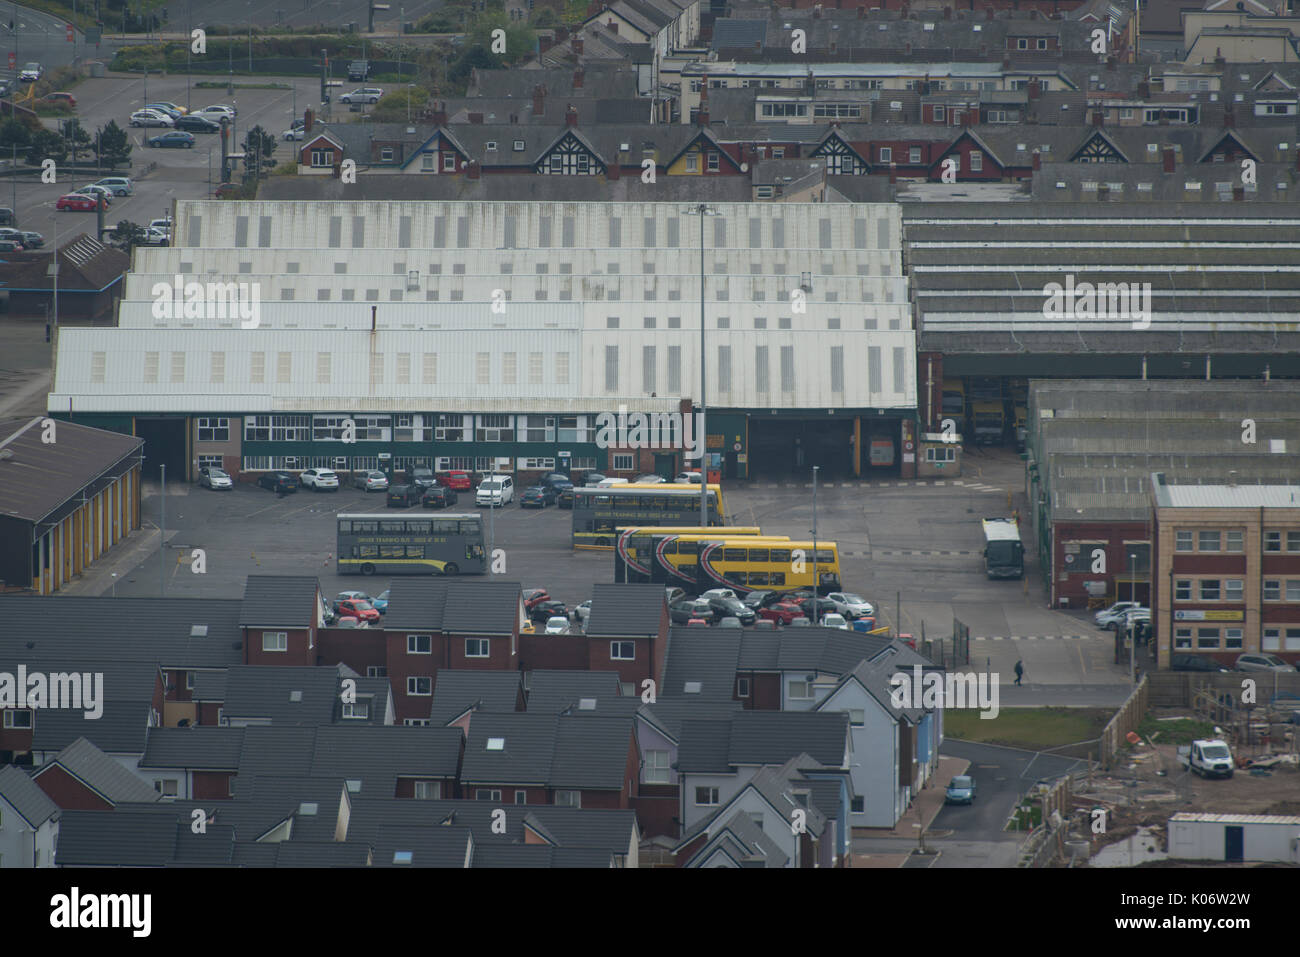 Blackpool, Transport services, Bus depot on Rigby road. credit: LEE RAMSDEN / ALAMY Stock Photo